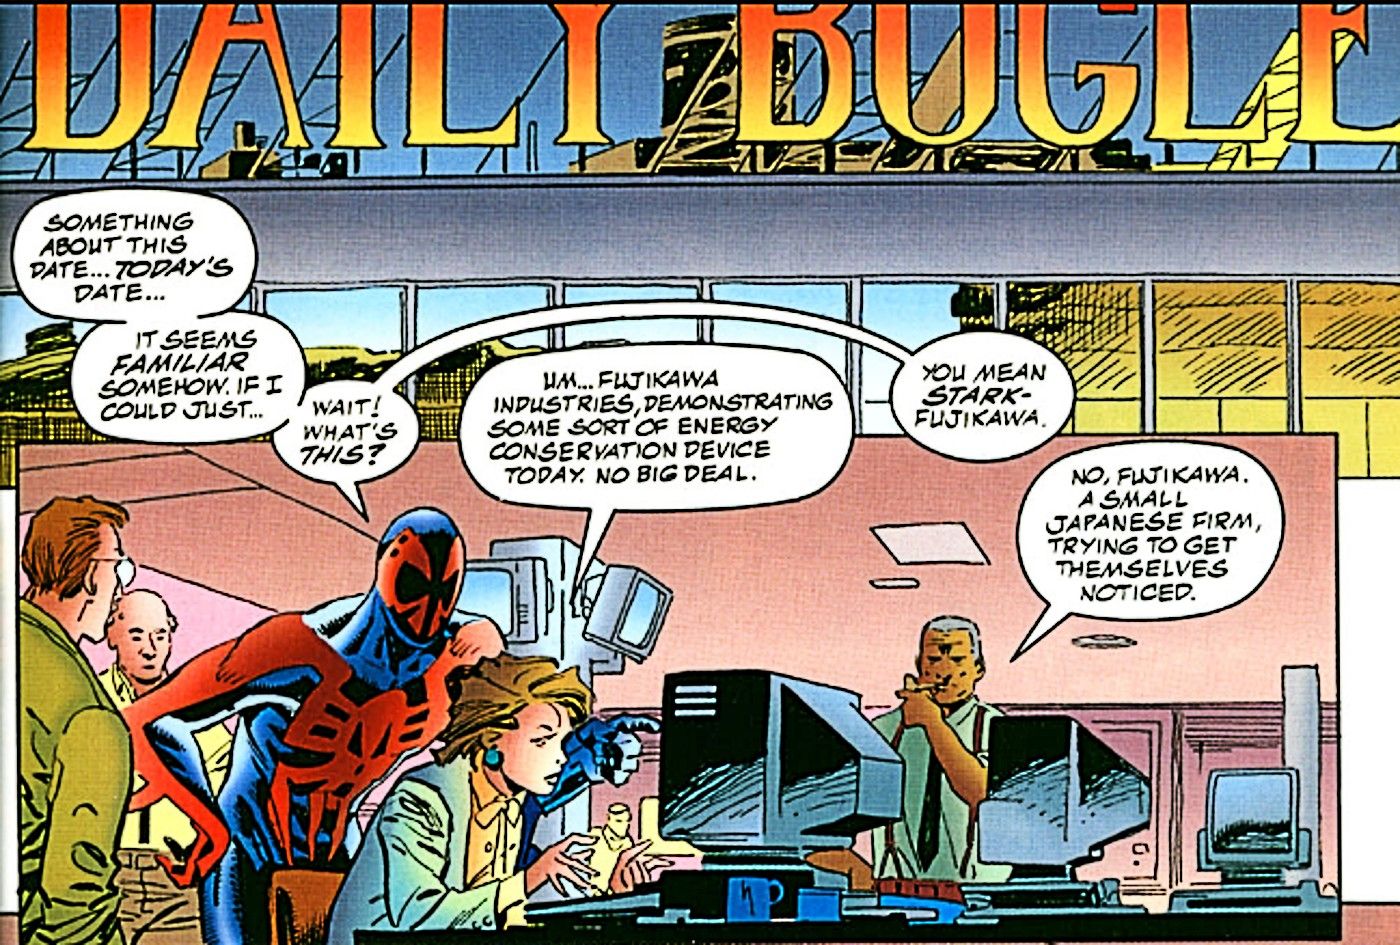 Miguel O'Hara visits the Daily Bugle in the past to find out what day it is